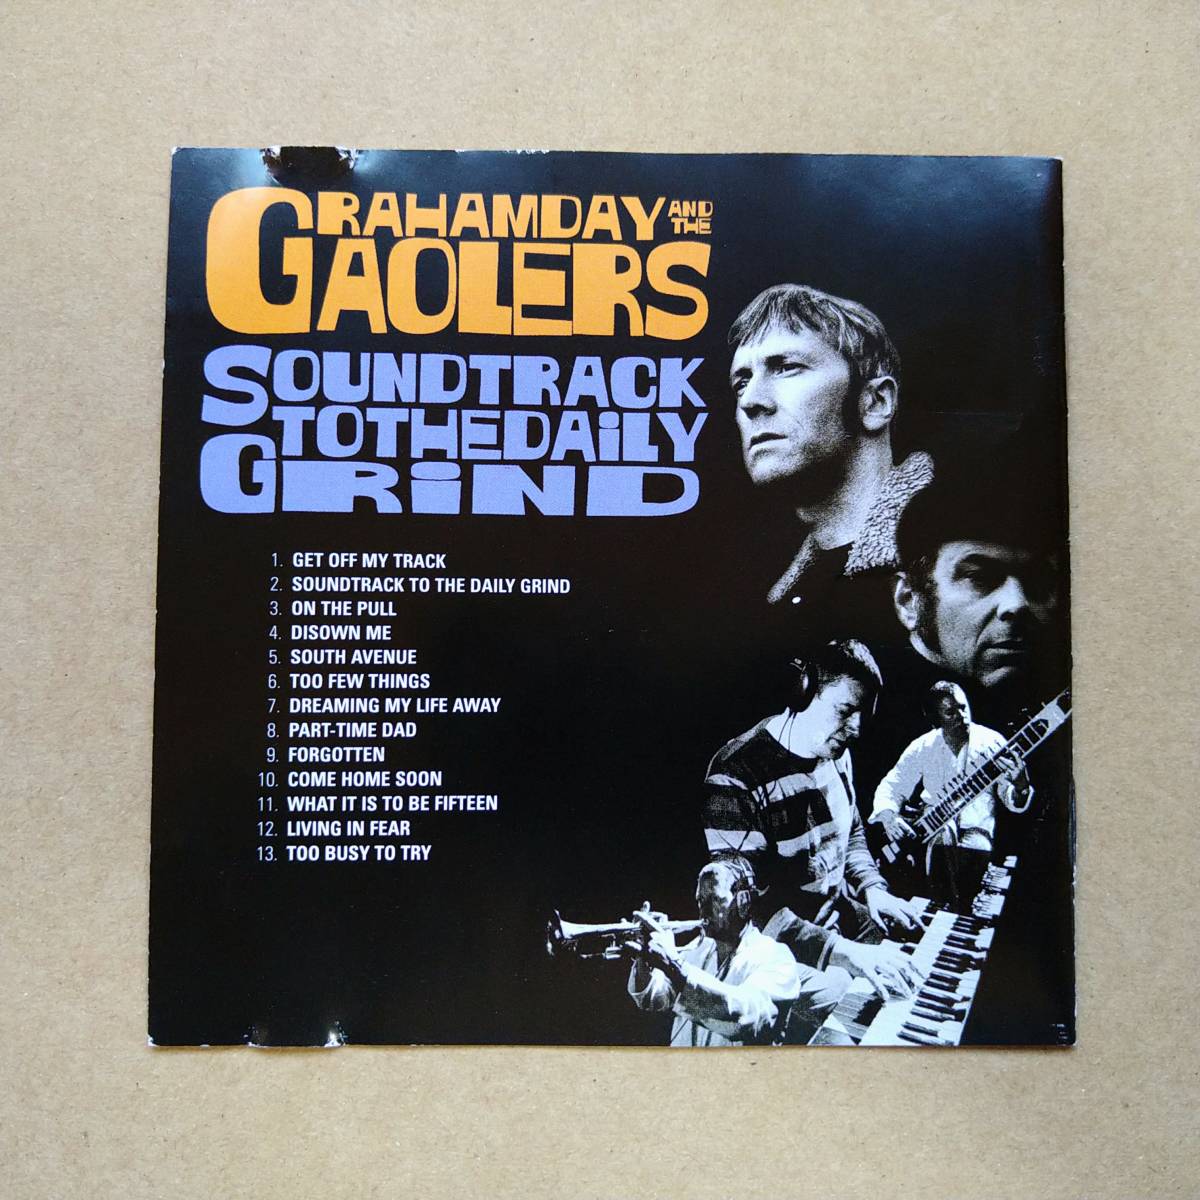 GRAHAM DAY & THE GAOLERS / Soundtrack To The Daily Grind [CD] 2007年 輸入盤 DAMGOOD294-CD ガレージ/ネオモッズ/The Prisoners_画像6